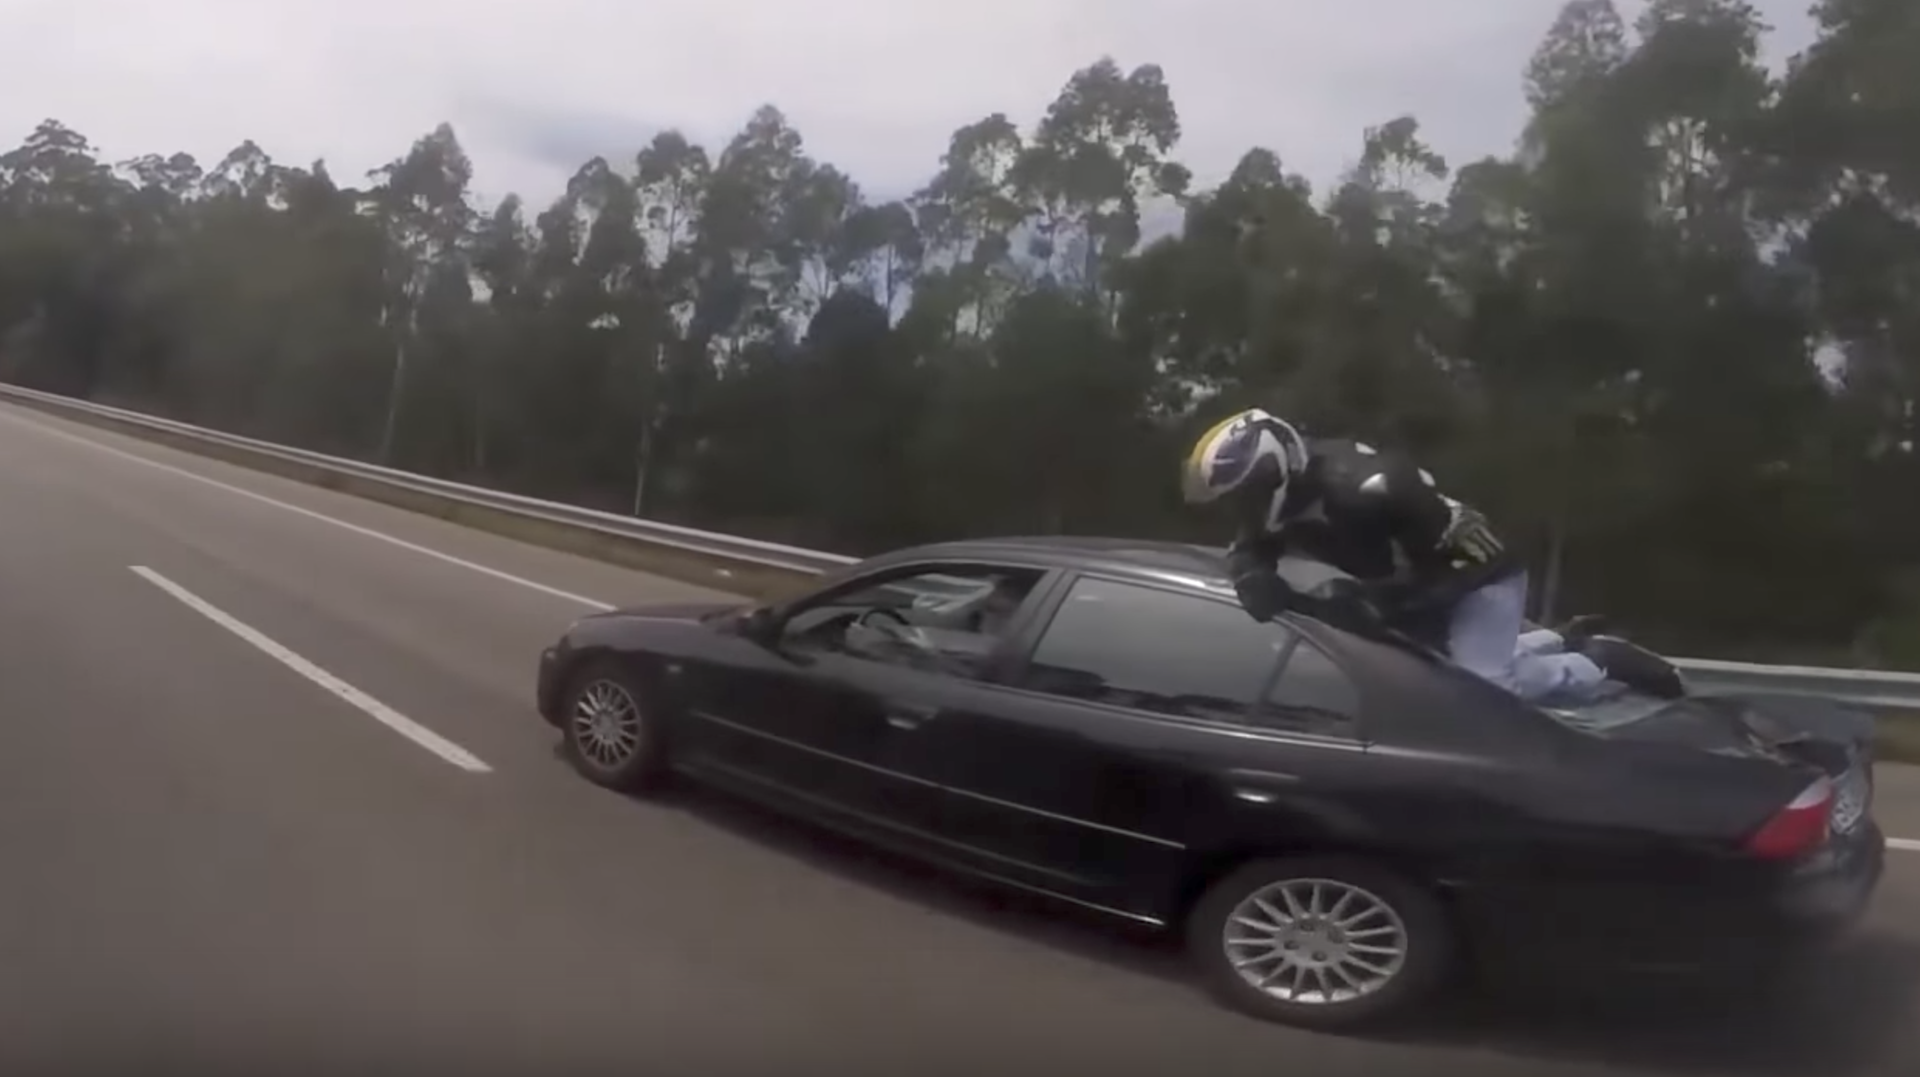 Watch This Motorcyclist Cling to a Car After Falling Off Bike on a Highway